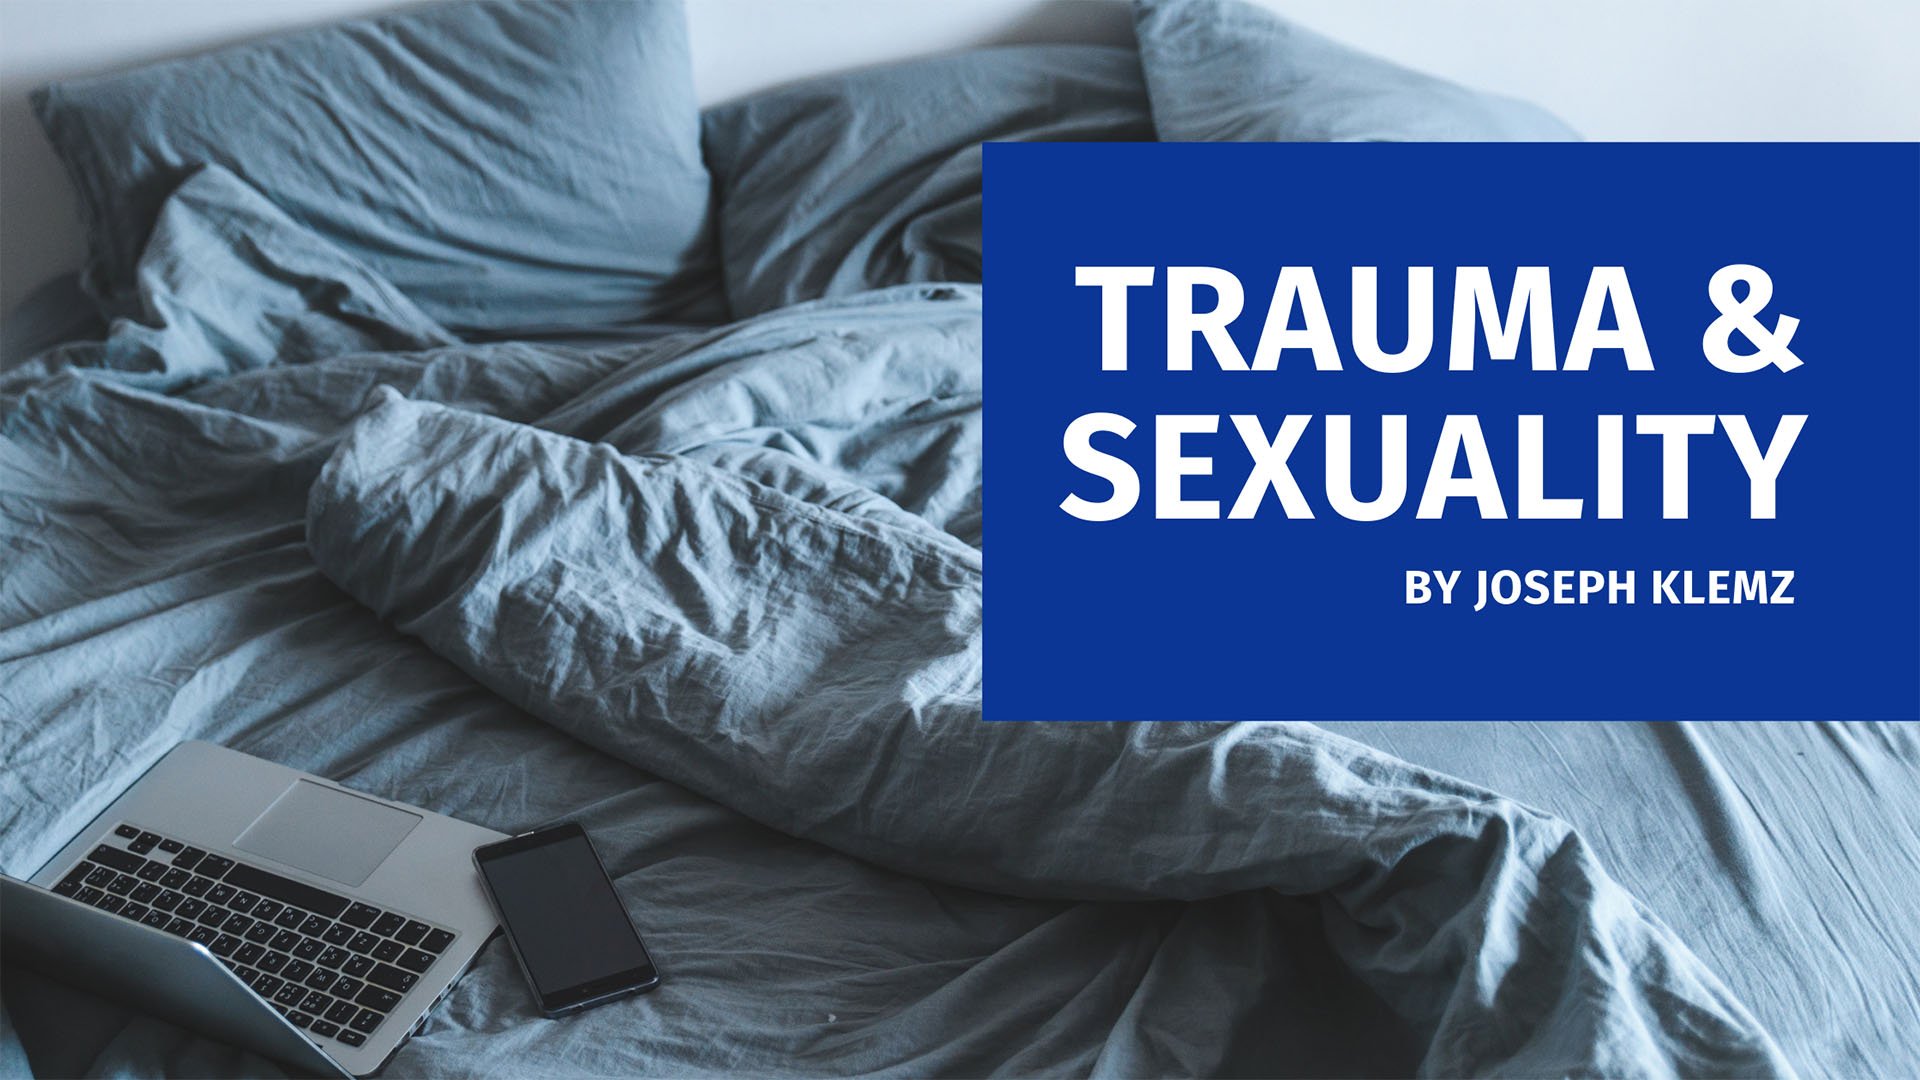 The Down & Dirty on Trauma and Sexuality